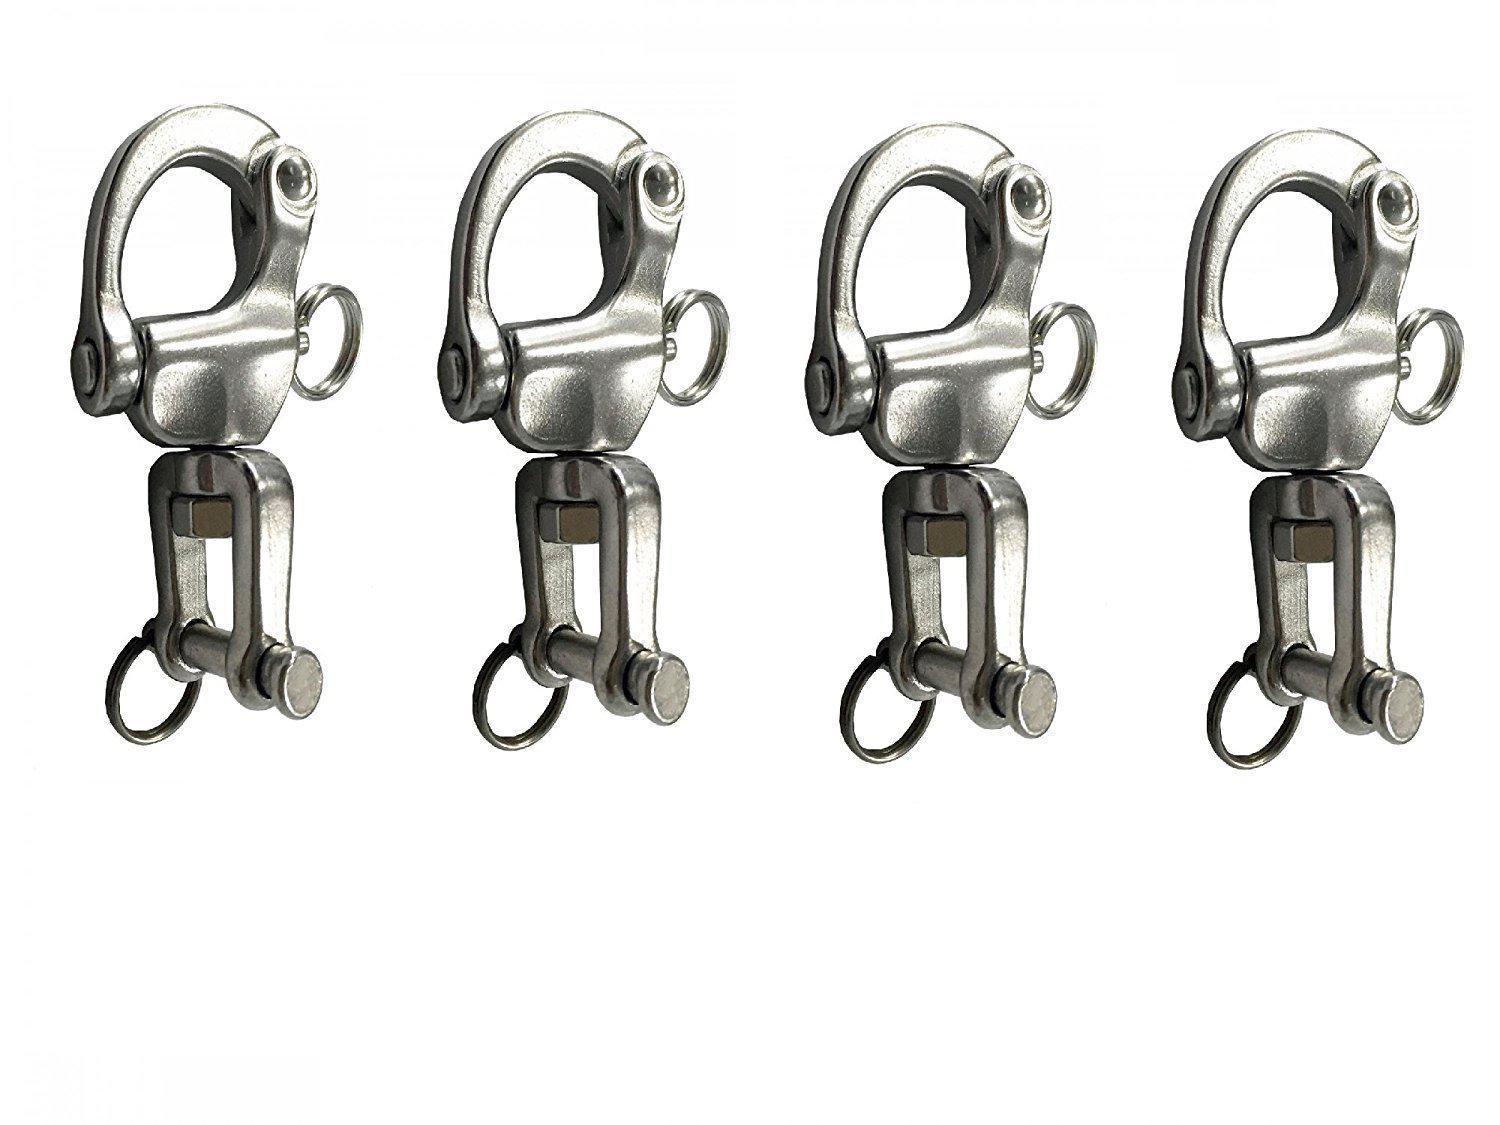 2-3/4" Jaw Swivel Snap Tack Shackle for Sailboat - Stainless Steel (SET OF 4) - Five Oceans-Canadian Marine &amp; Outdoor Equipment